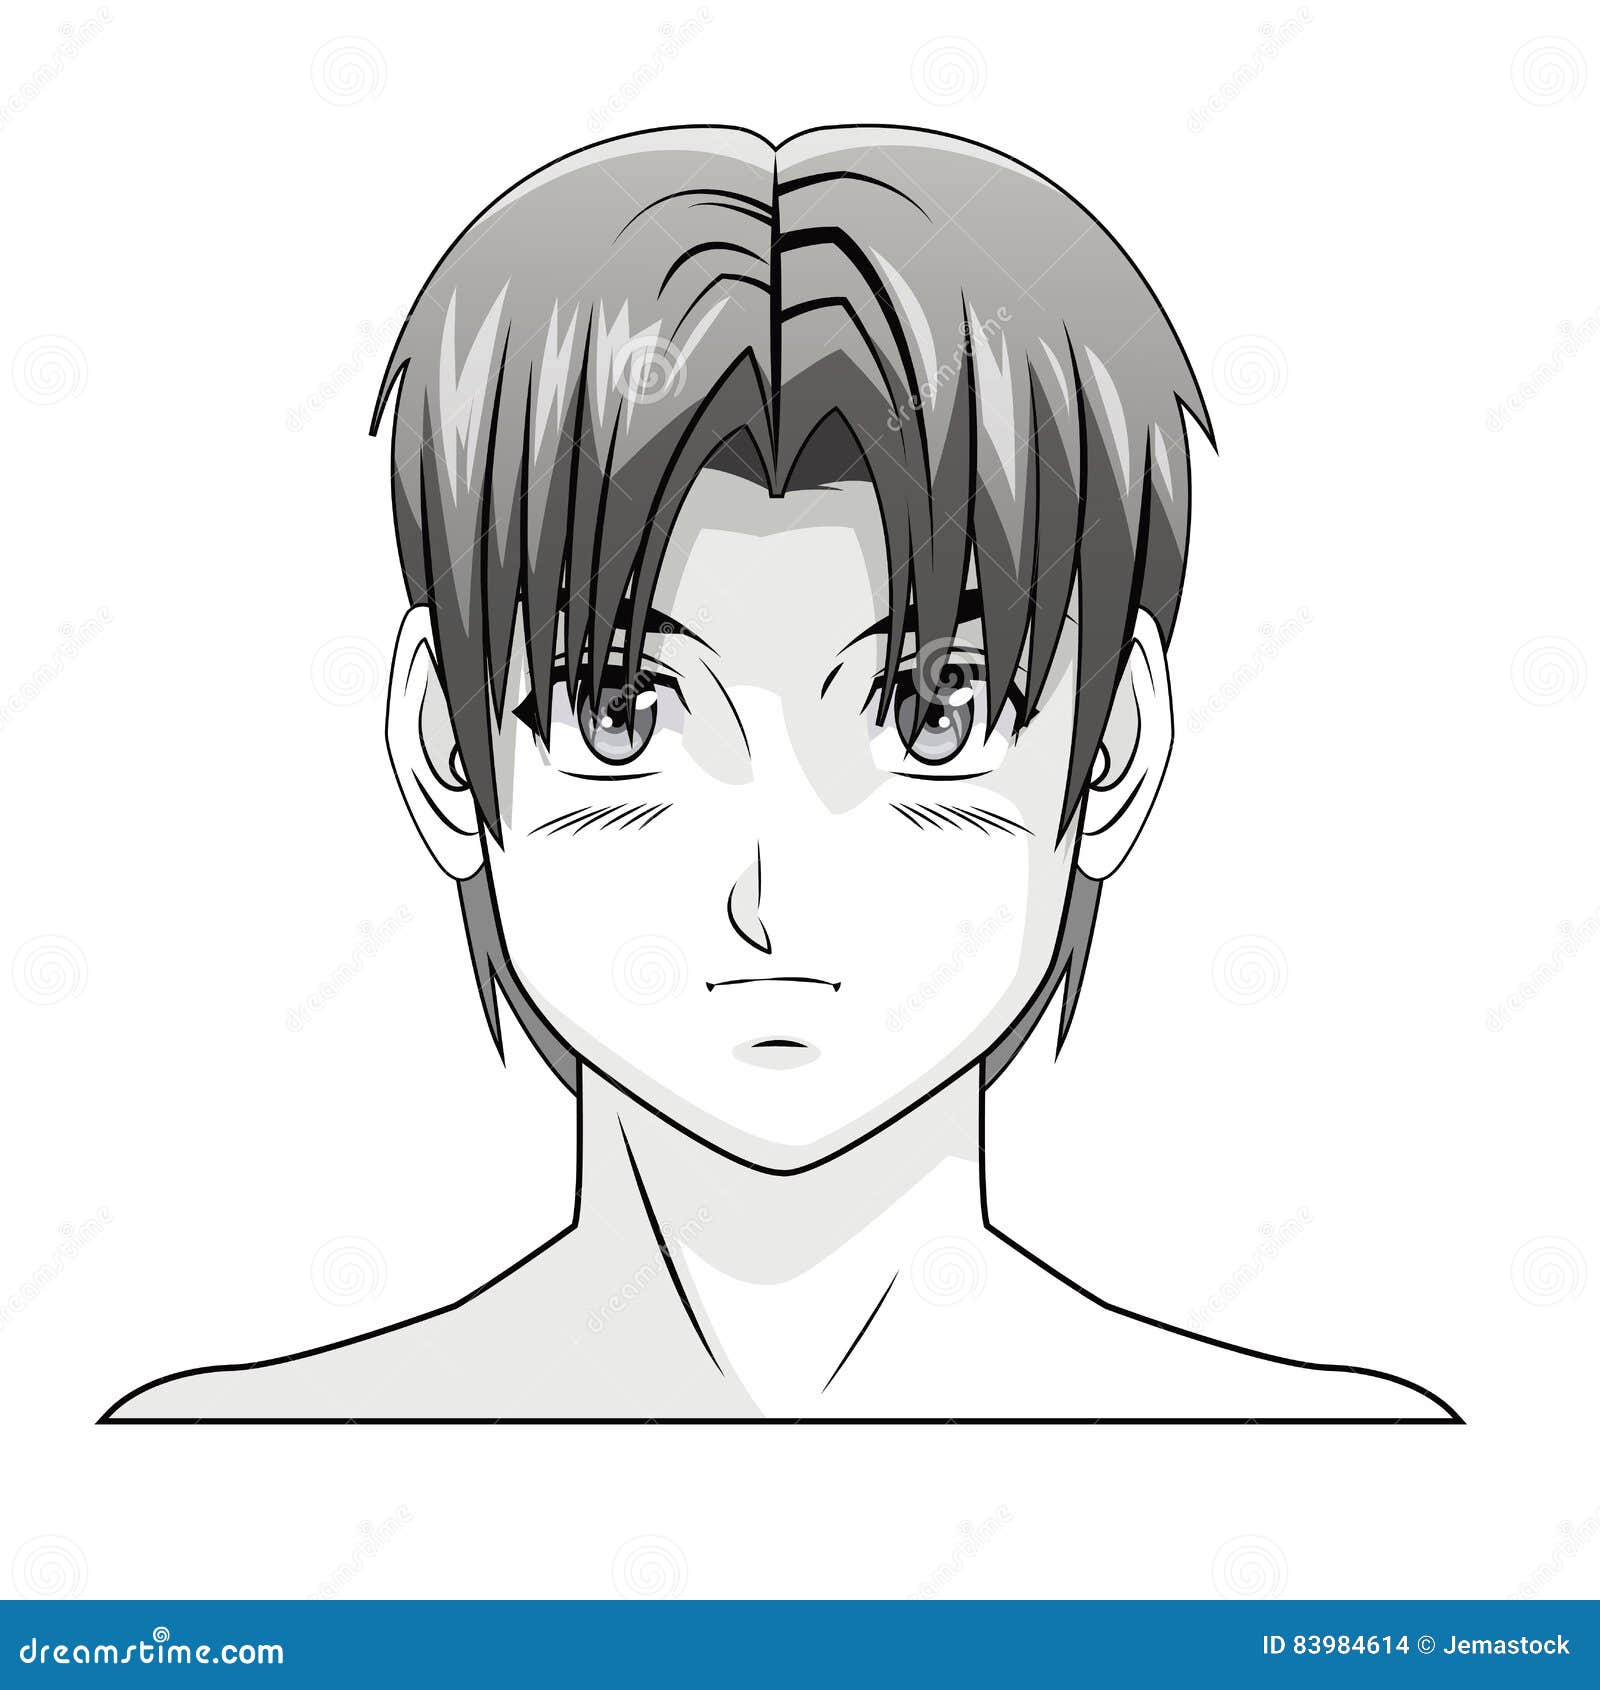 anime guy side view face